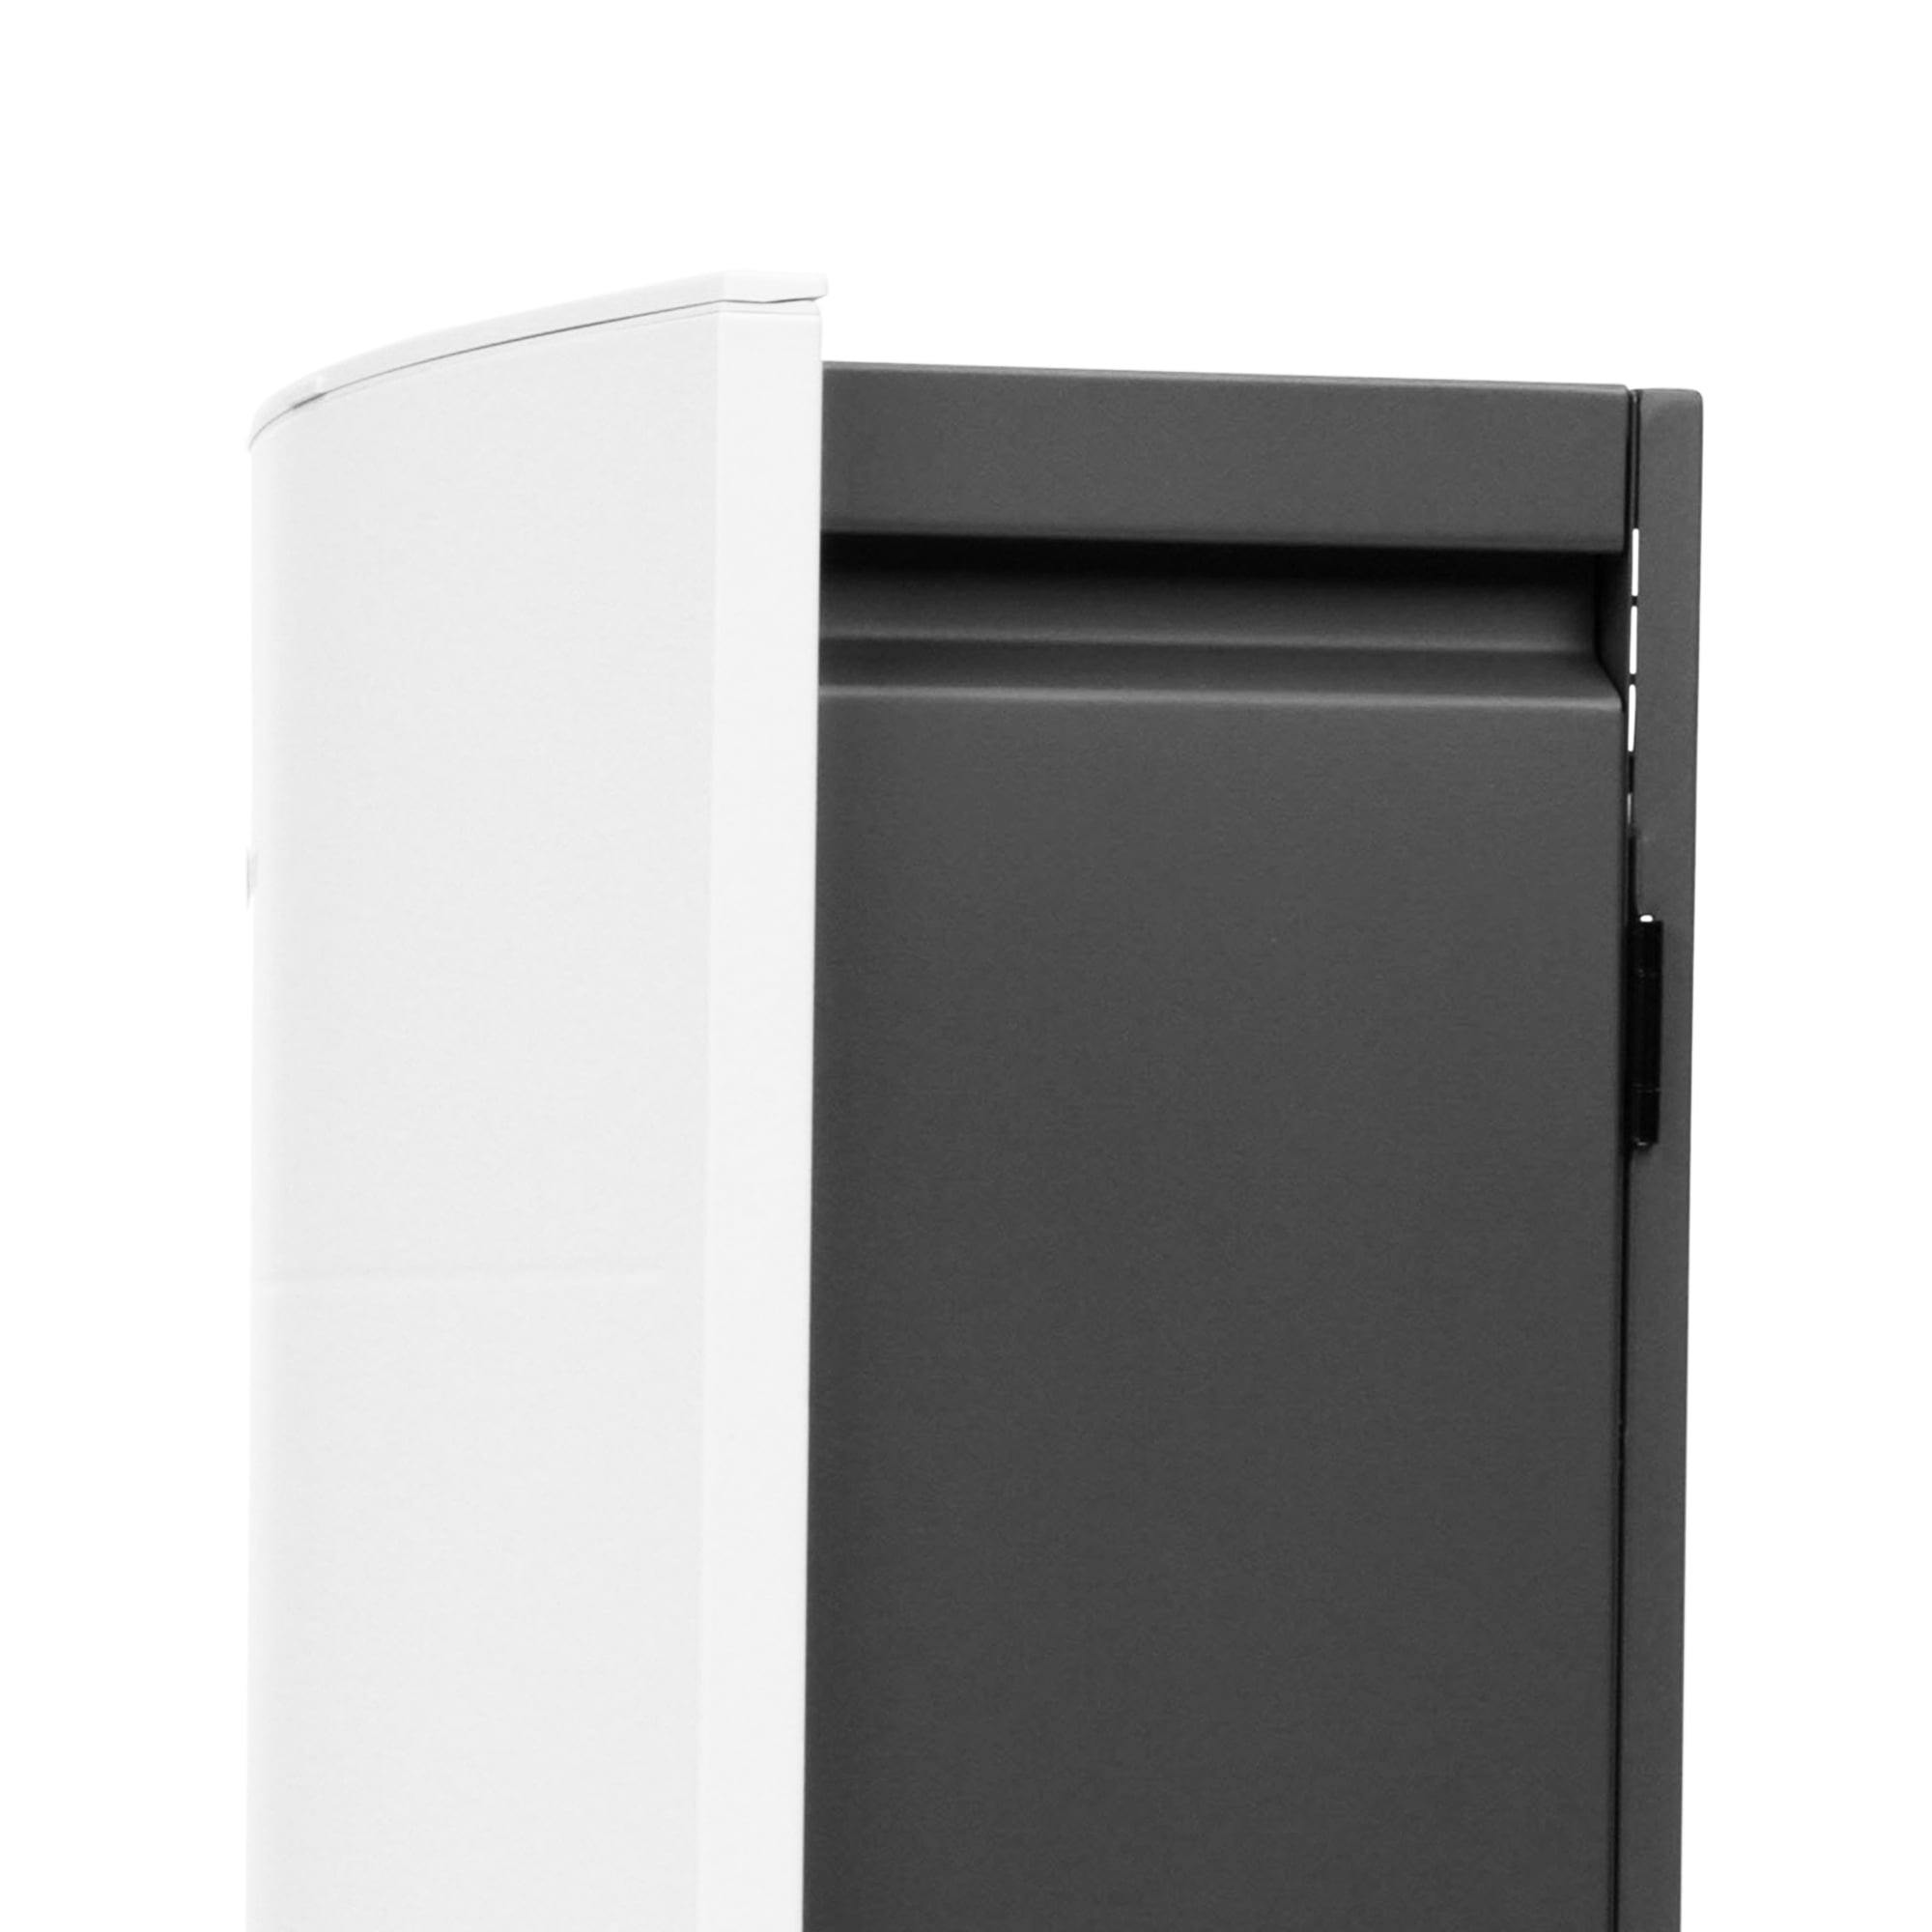 Blueair Classic 280i Air Purifier for home with HEPASilent 